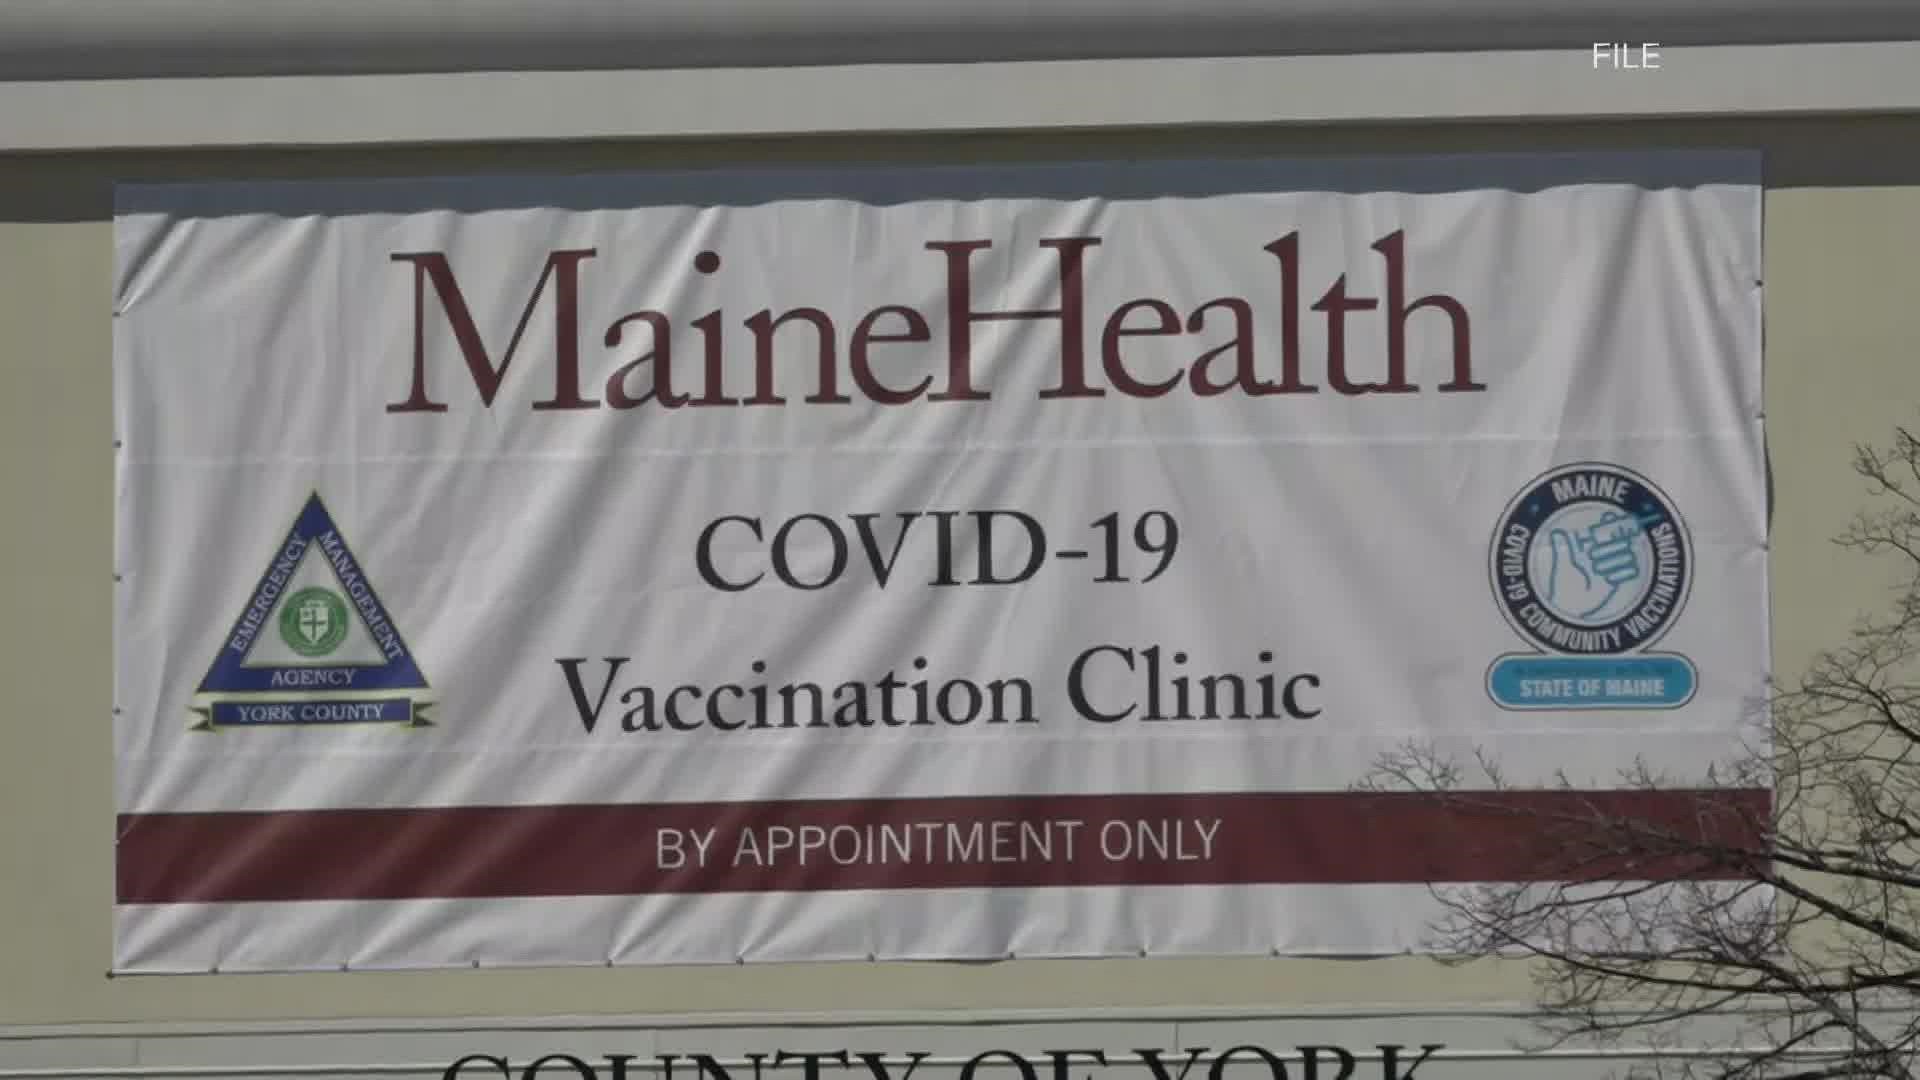 The vaccine clinic is opening in an effort to make it easier than ever for the unvaccinated to get their shots.